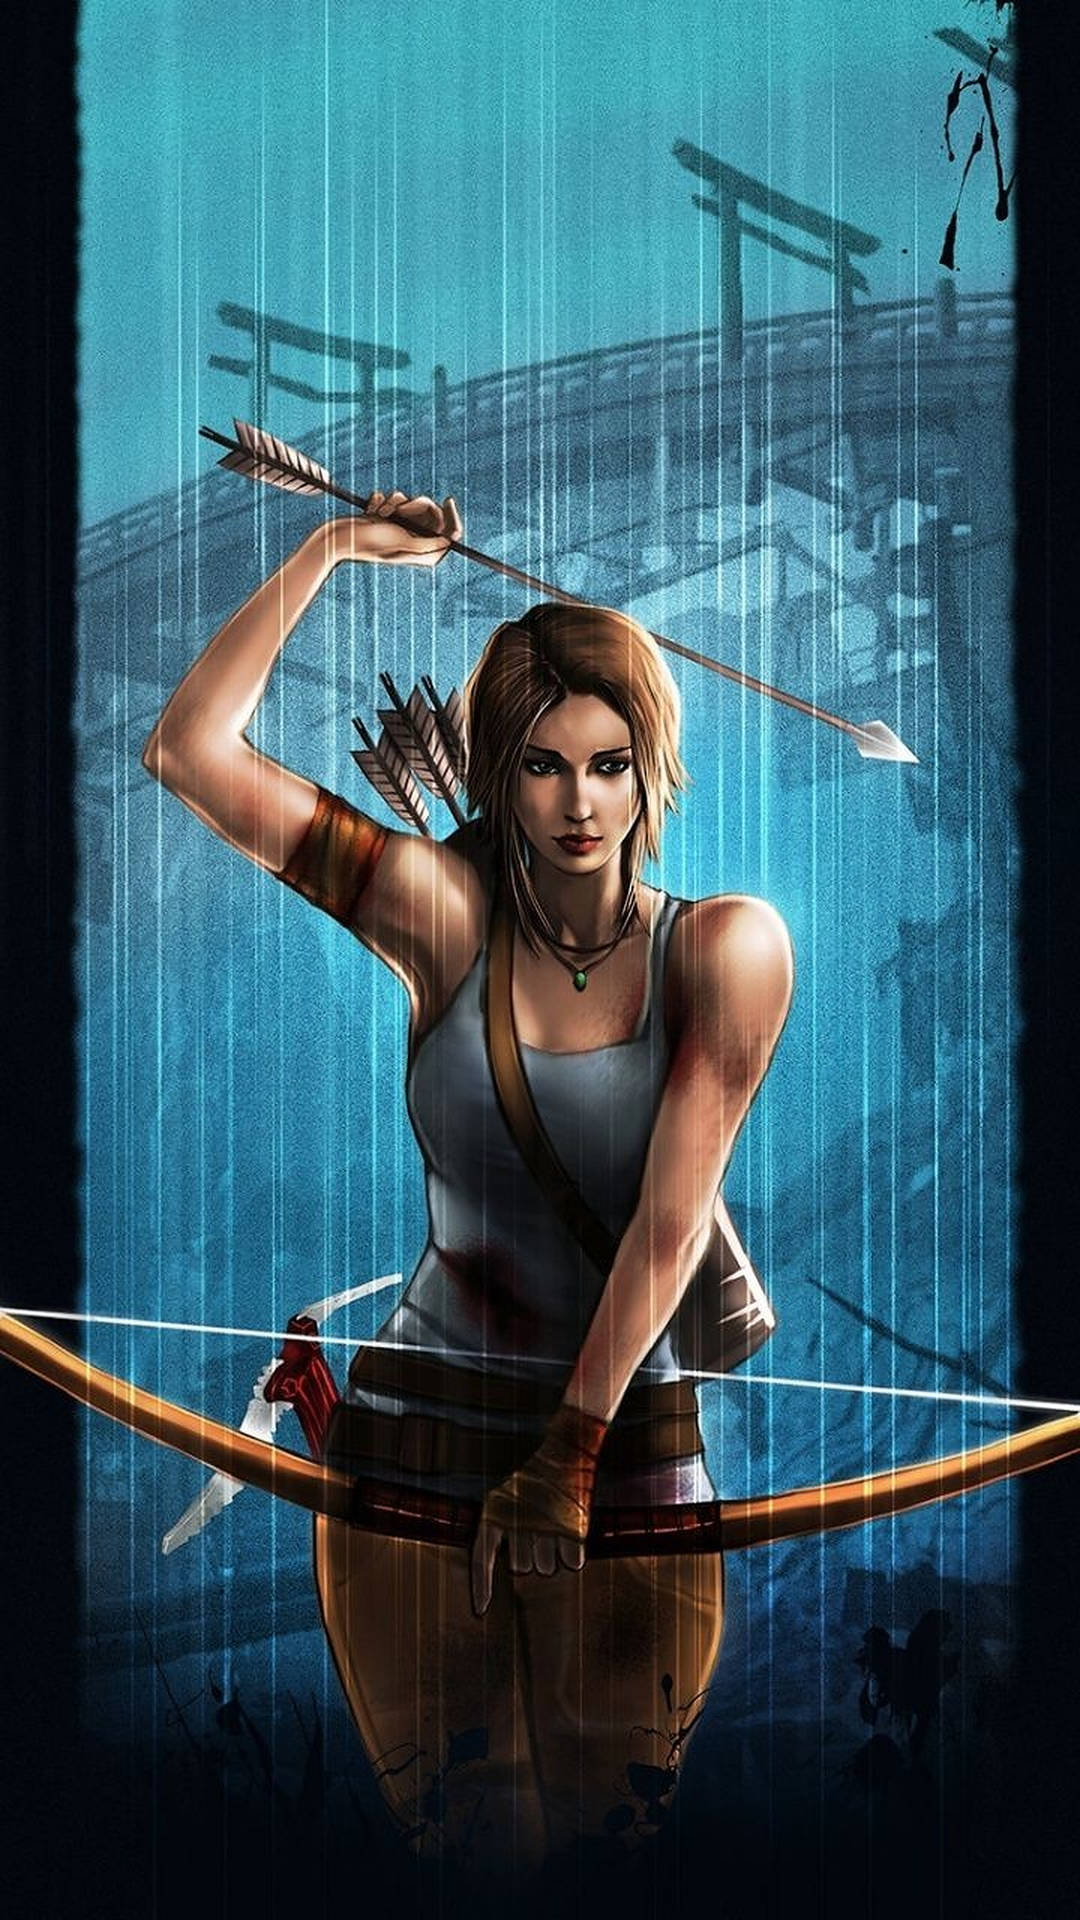 Caption: Lara Croft In Action With Her Legendary Archery Skills Background